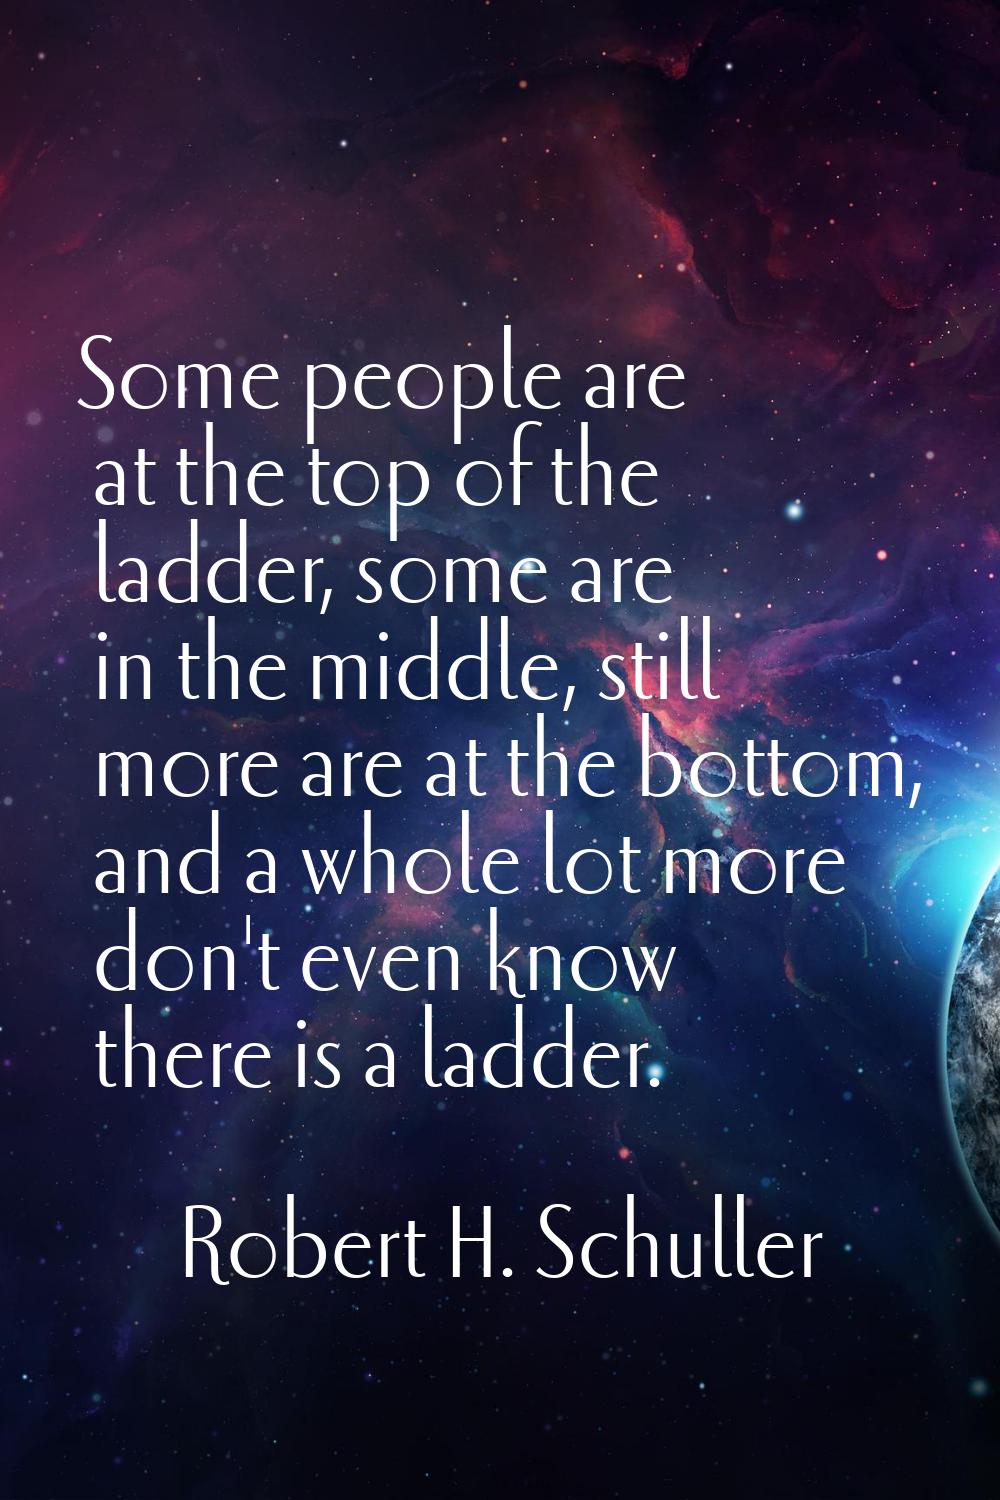 Some people are at the top of the ladder, some are in the middle, still more are at the bottom, and